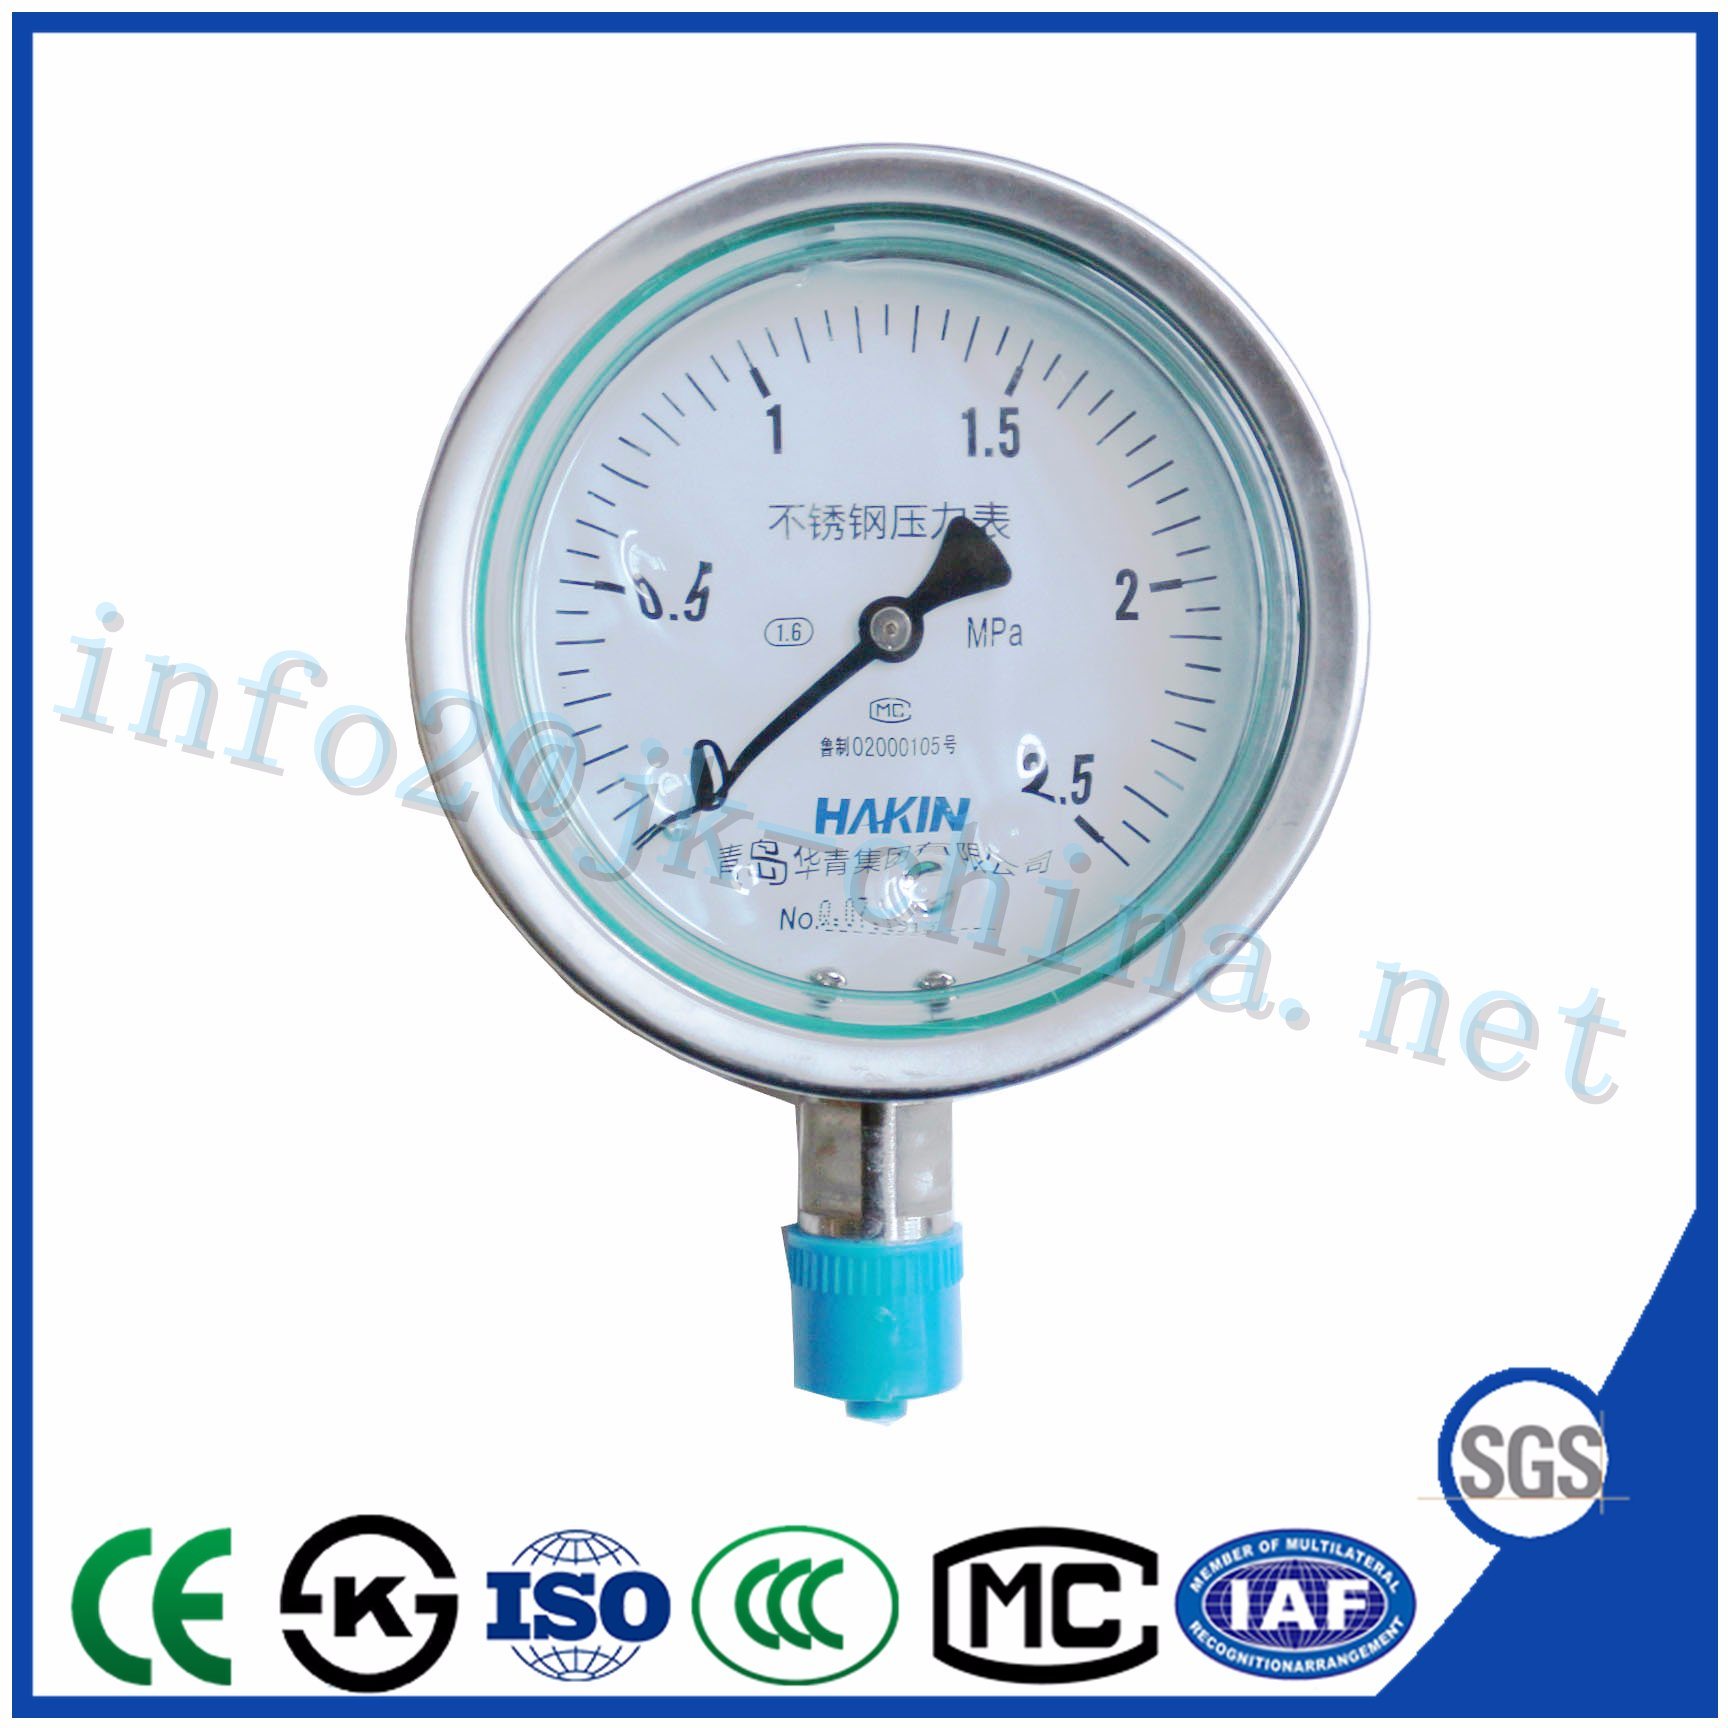 Ytfn High Quality and Best-Selling Stainless Steel Vibration-Proof Pressure Gauge